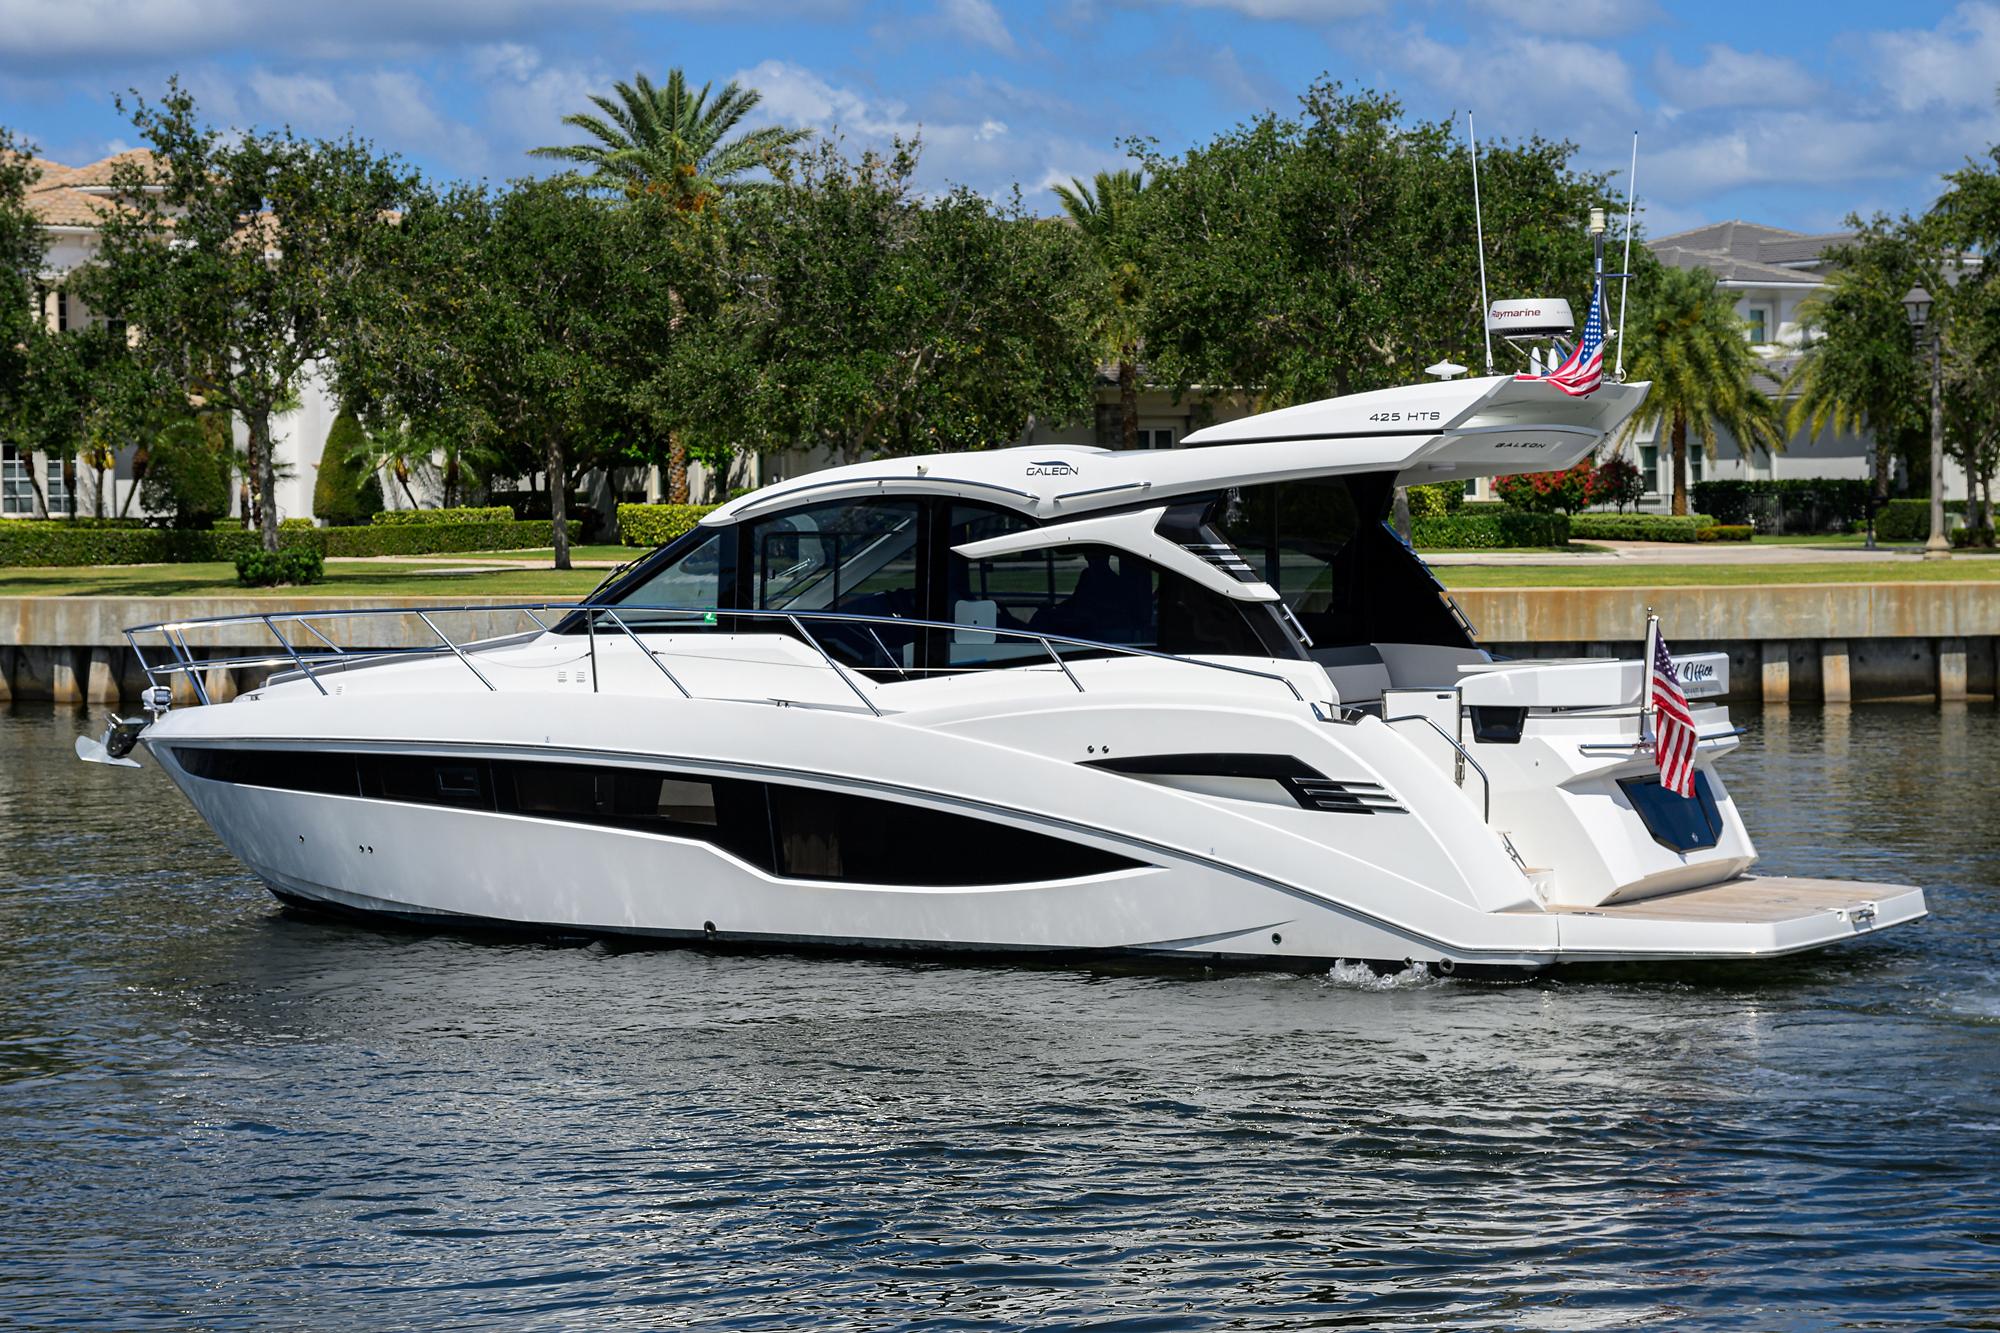 2021 Galeon - Exterior profile on the water